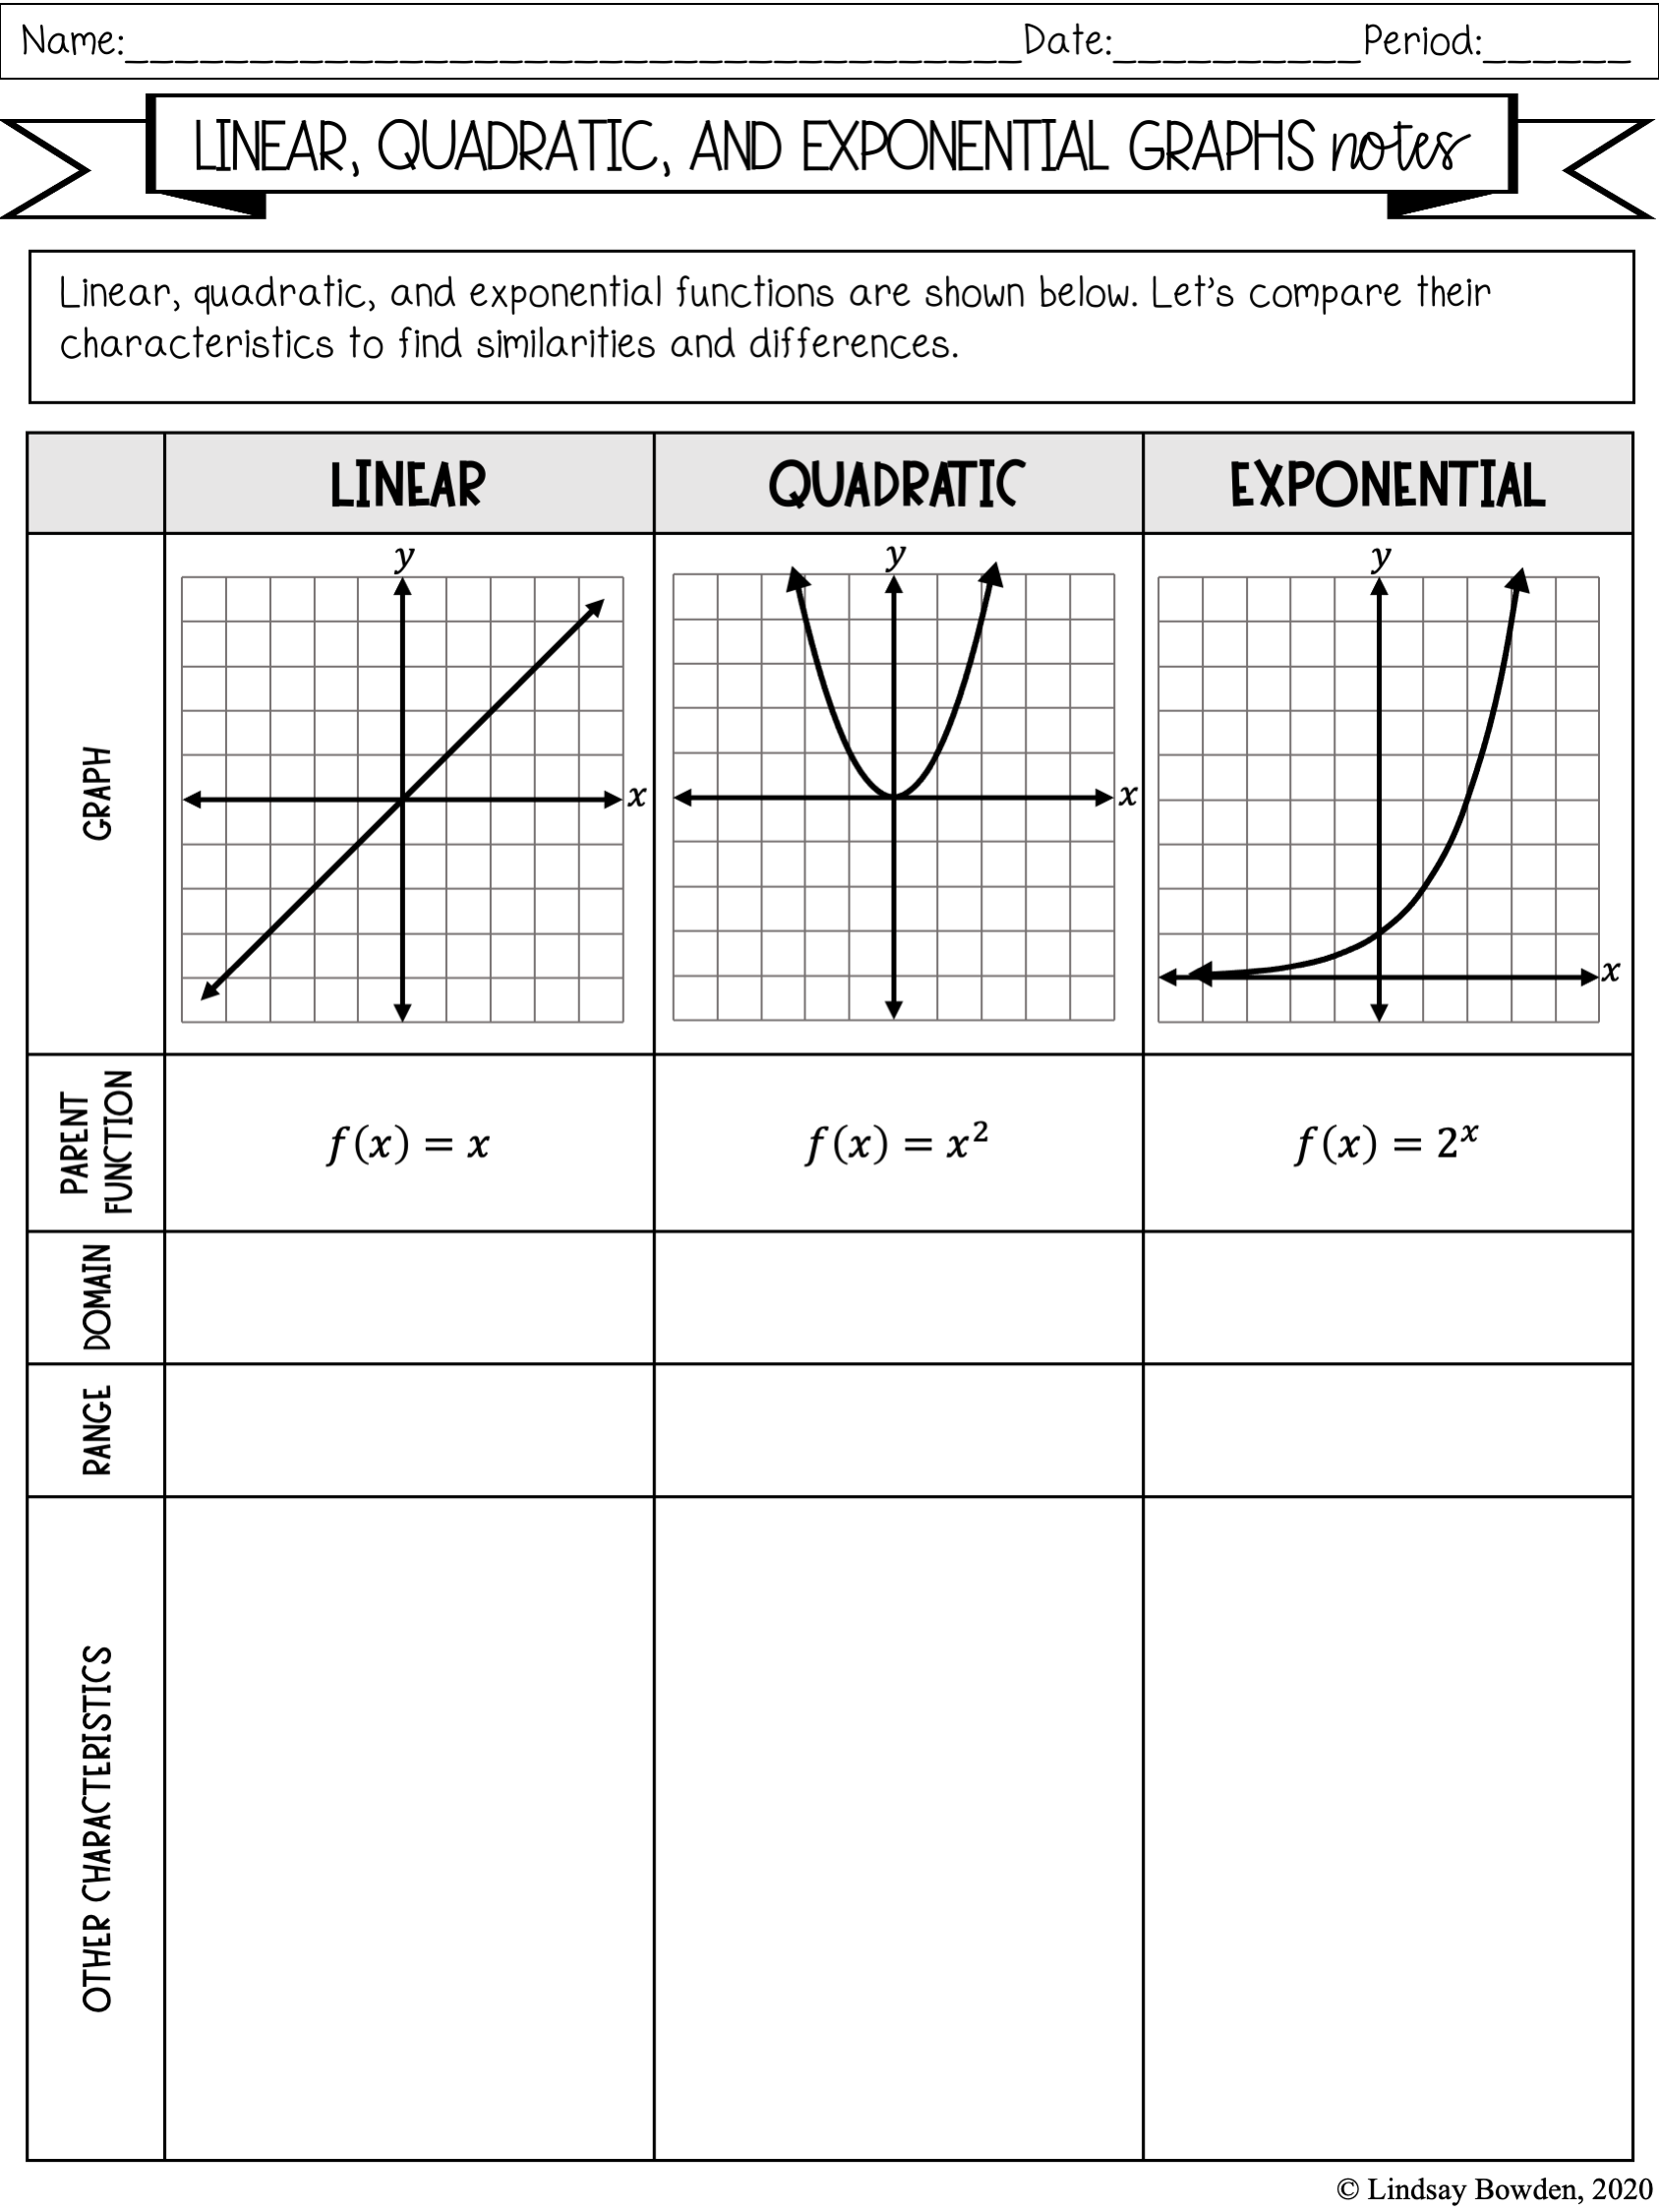 Linear, Quadratic, Exponential Notes and Worksheets - Lindsay Bowden In Linear Quadratic Systems Worksheet